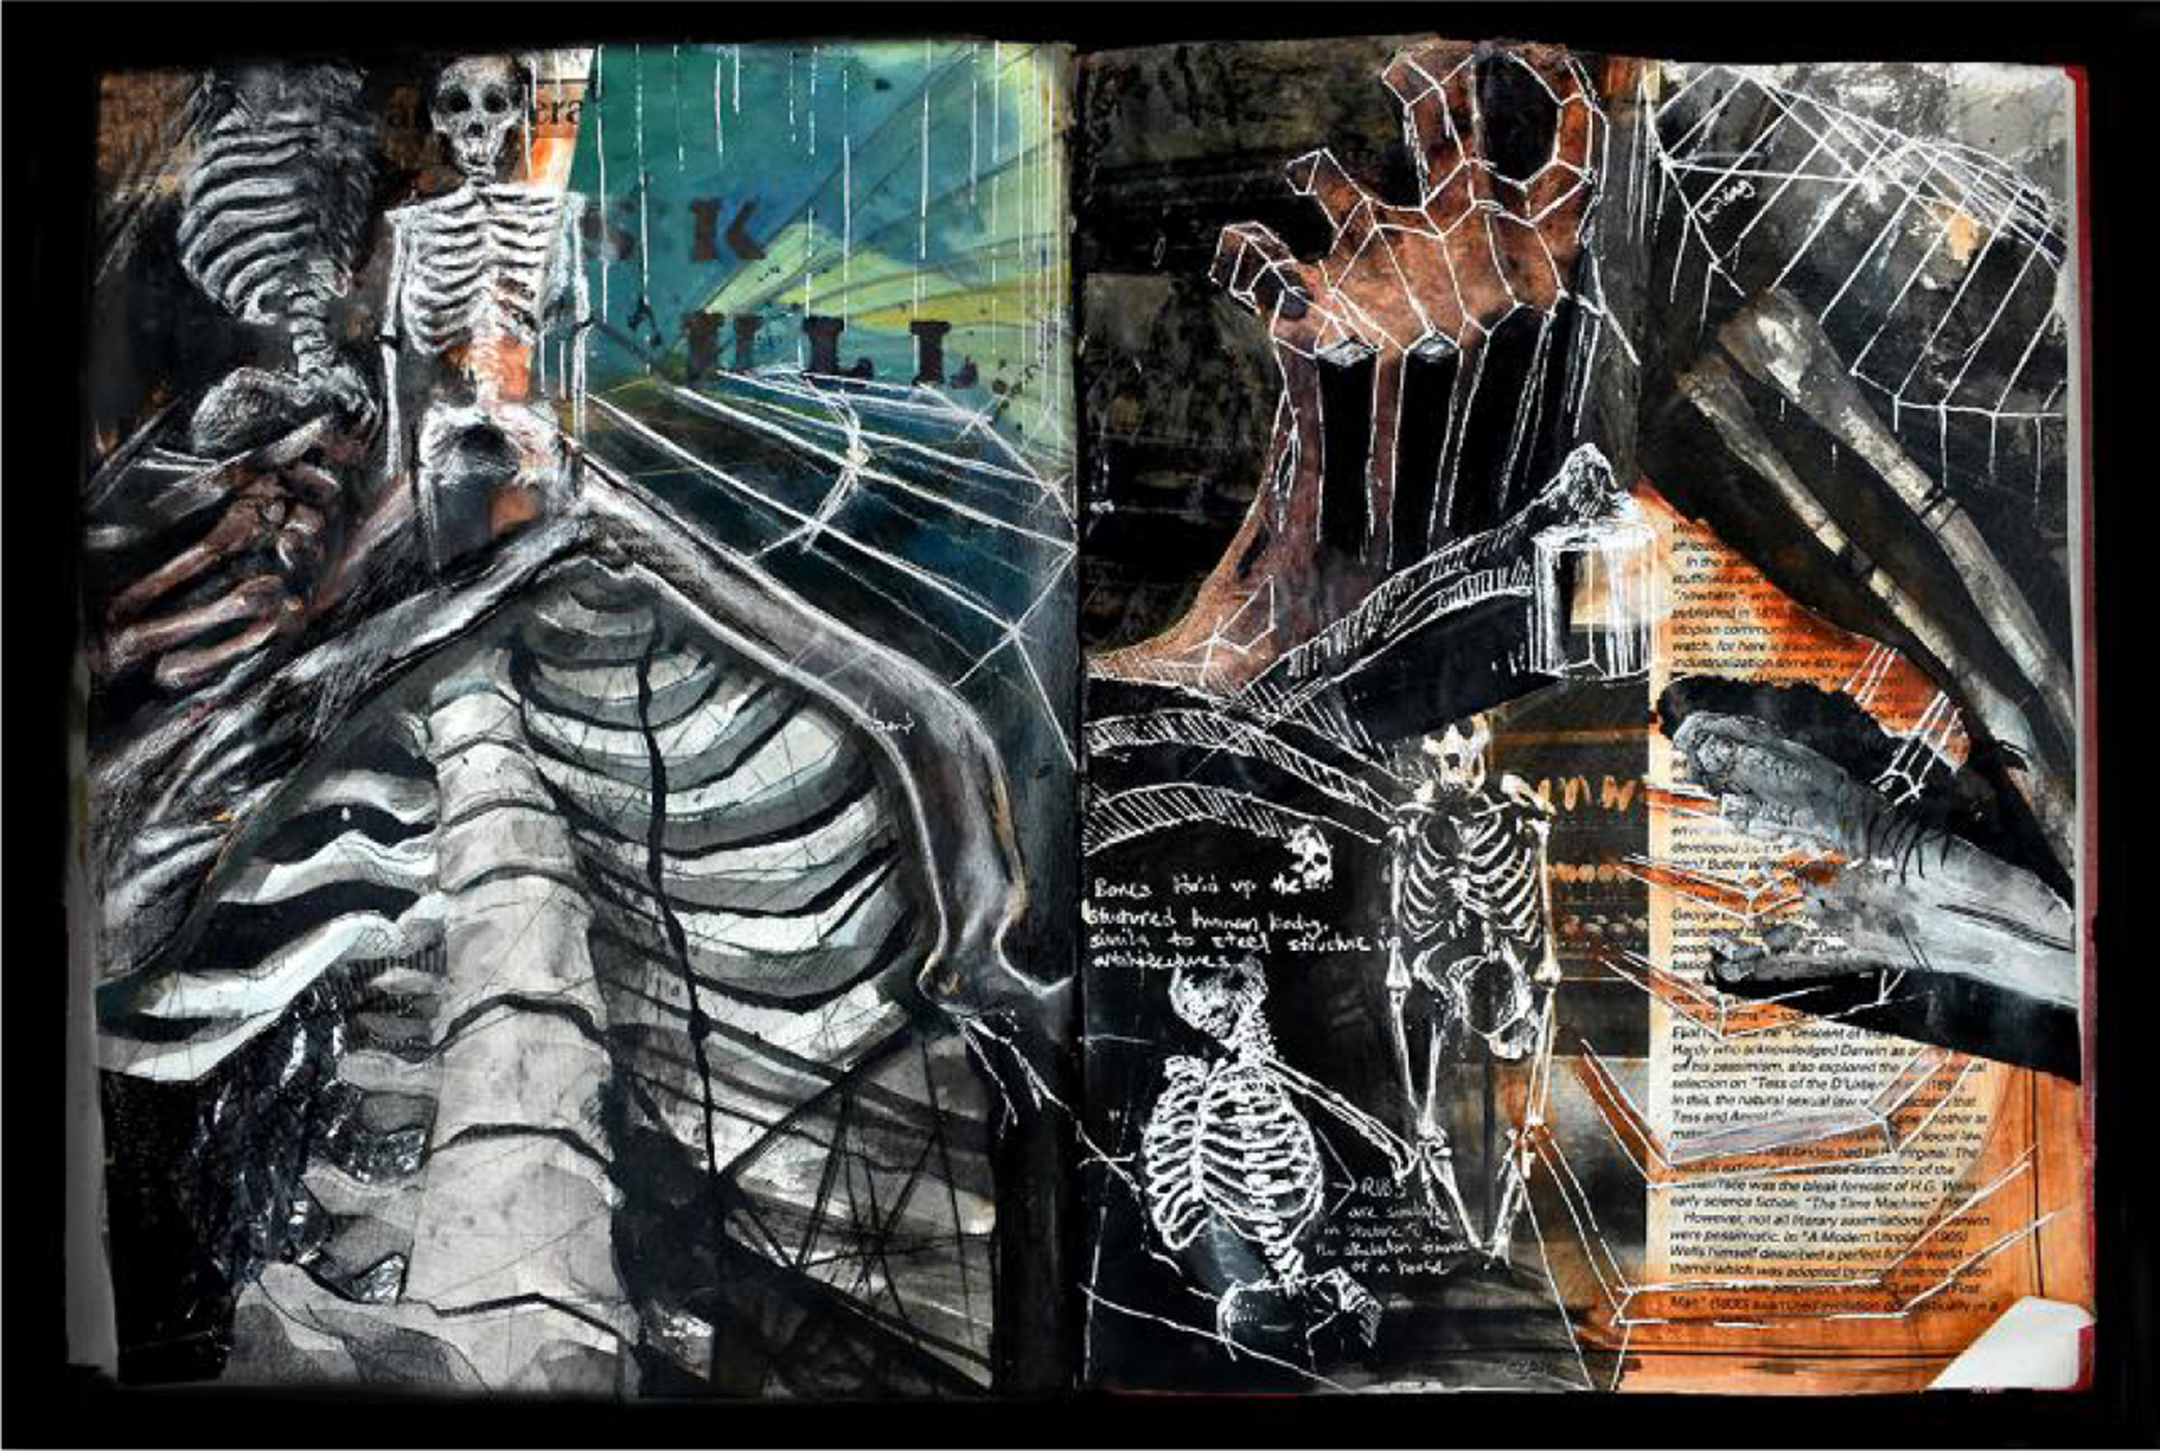 Two illustrations, side by side, of skeletons, bones, and rib cages